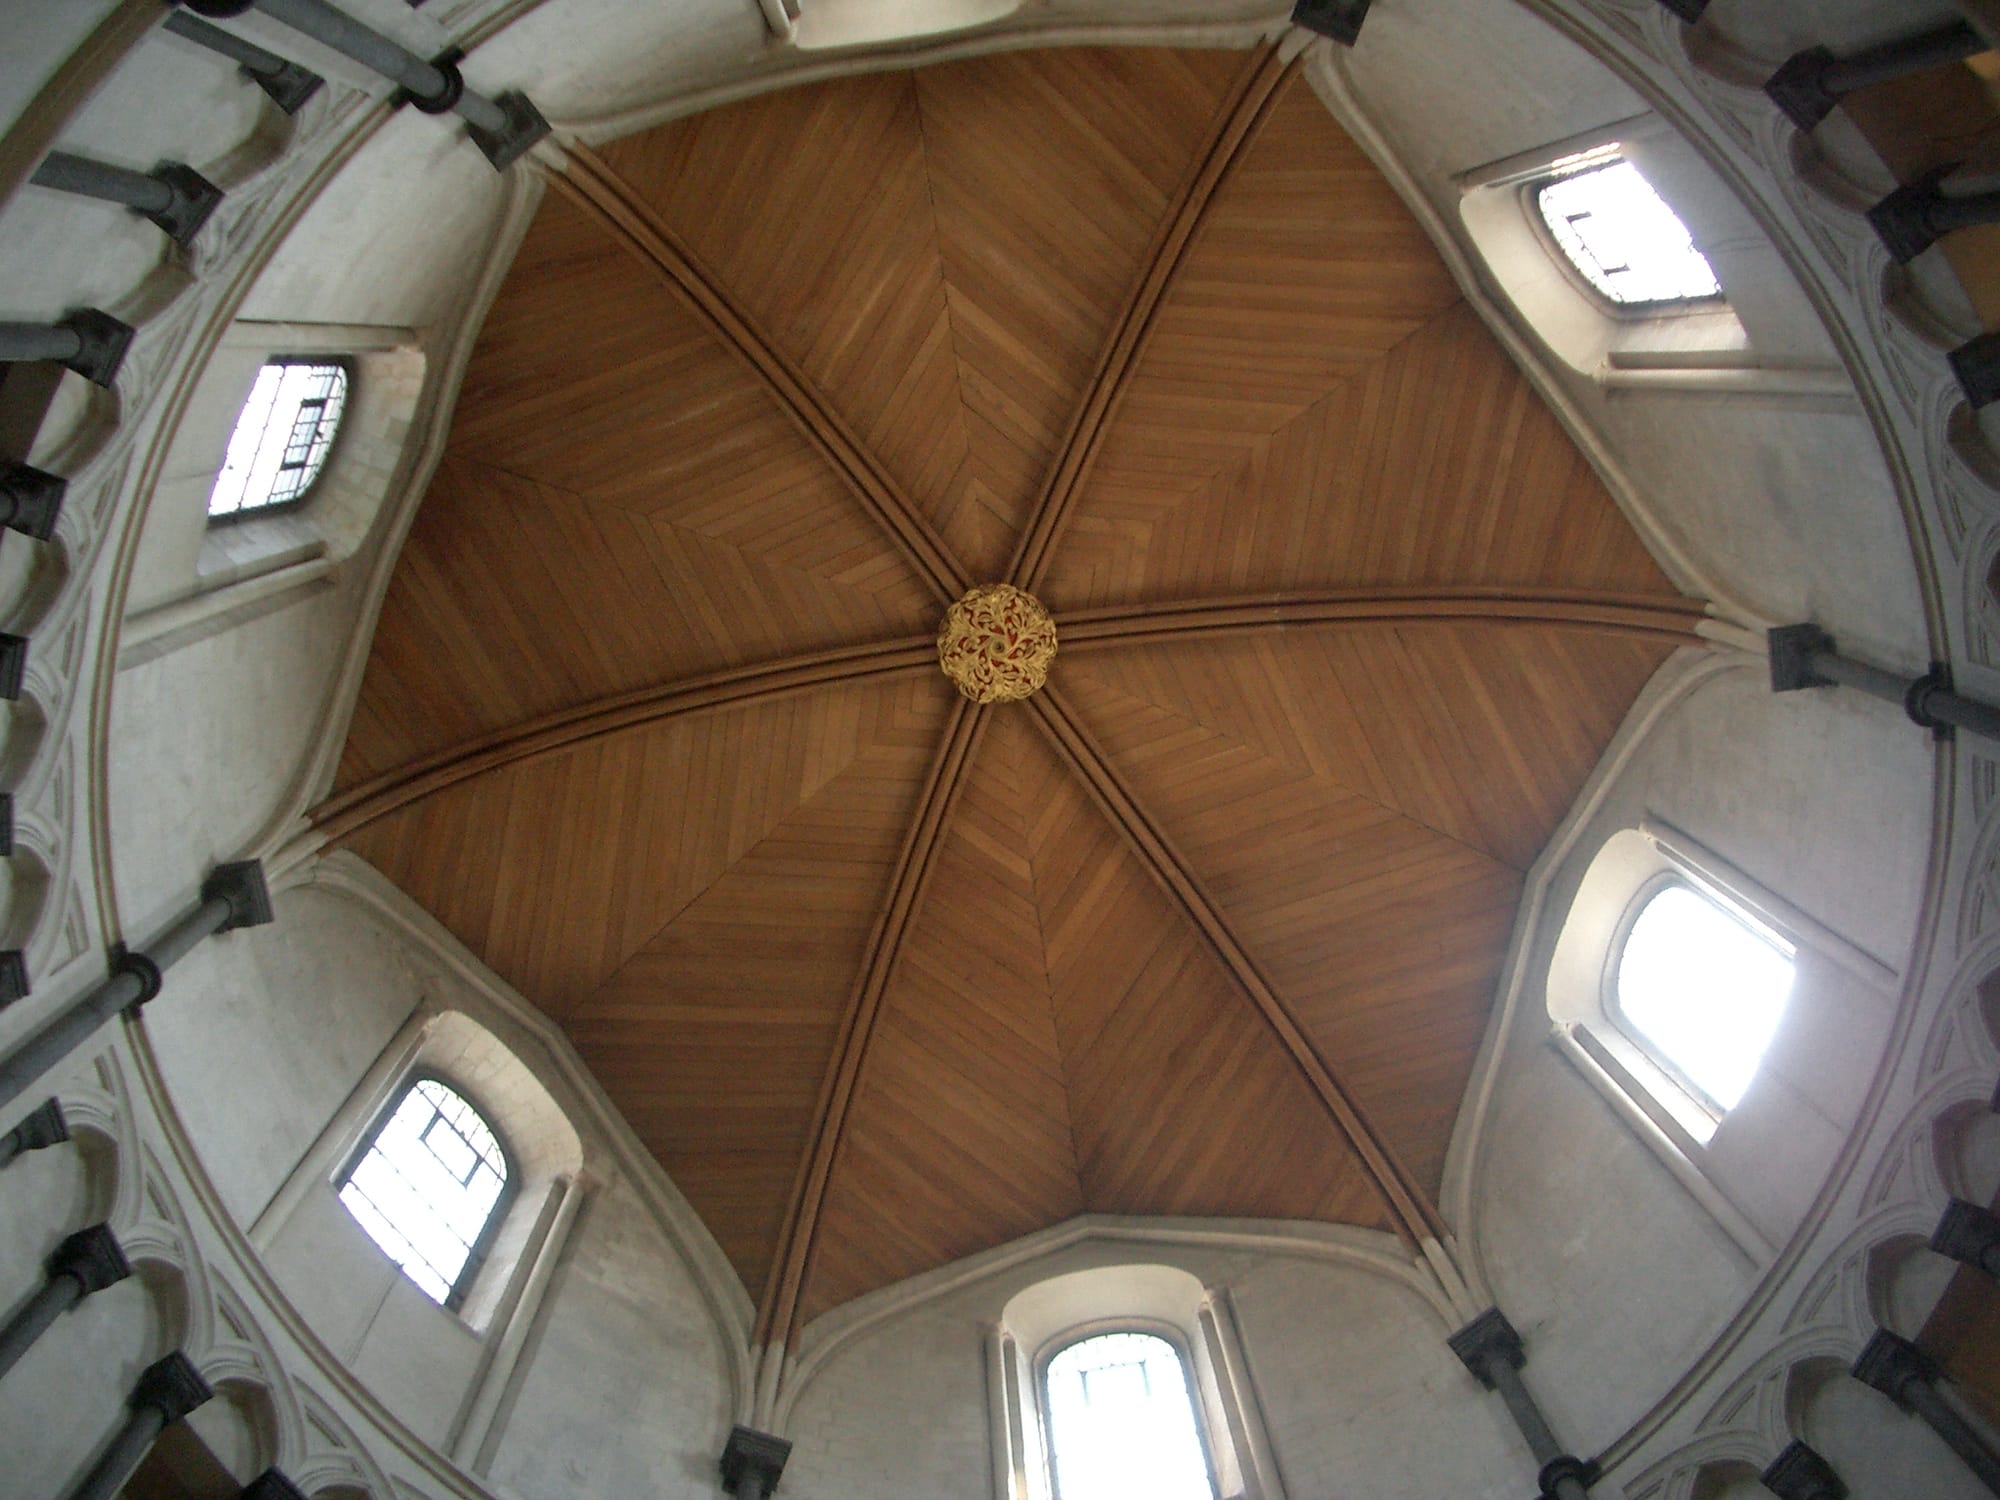 Ceiling of the Round Church, Temple Church, London, England ©2006 GRevelstoke